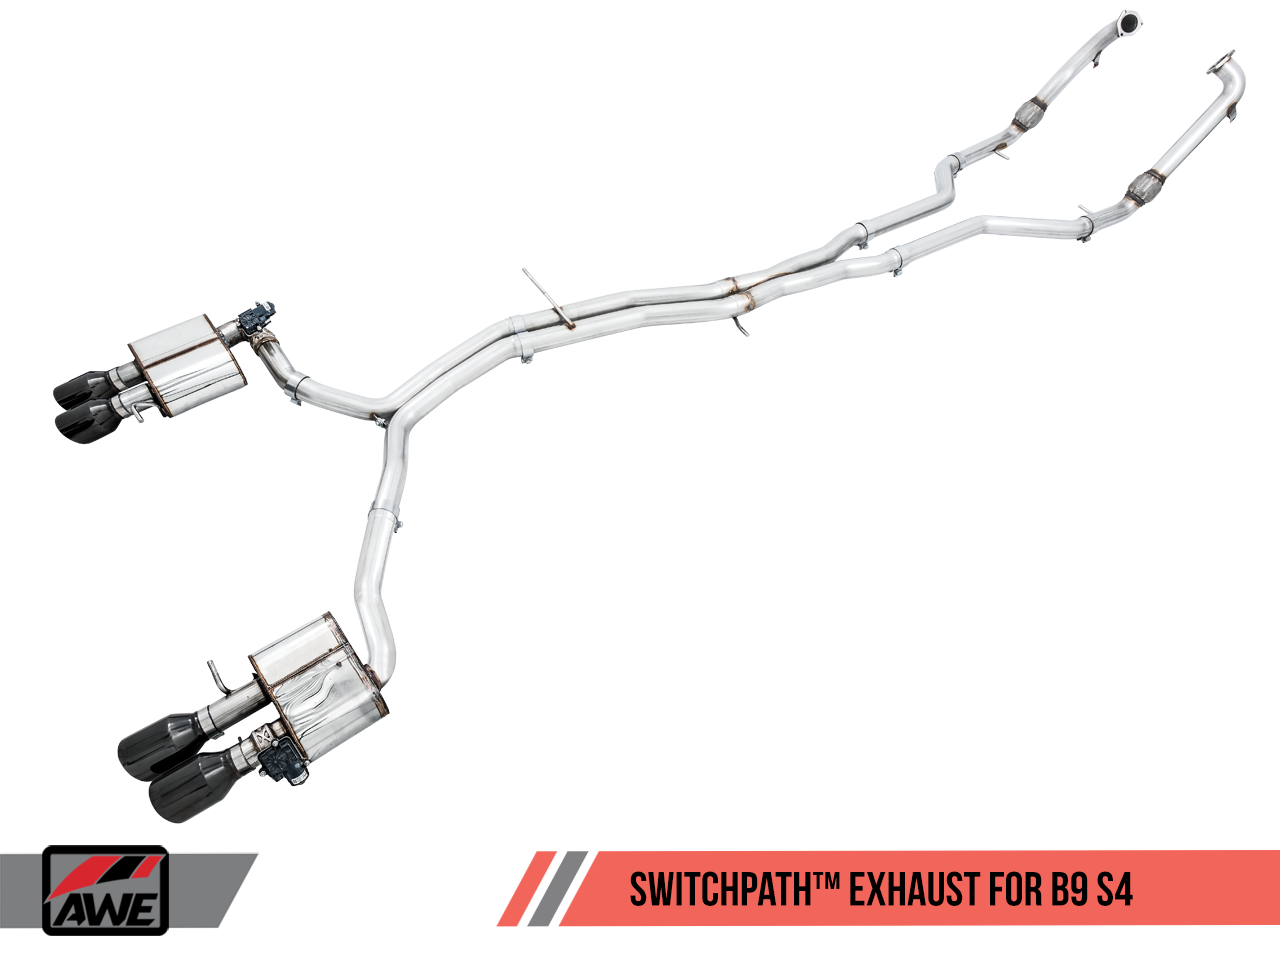 AWE SwitchPath Exhaust for B9 S5 Coupe - Resonated for Performance Catalyst - Diamond Black 90mm Tips